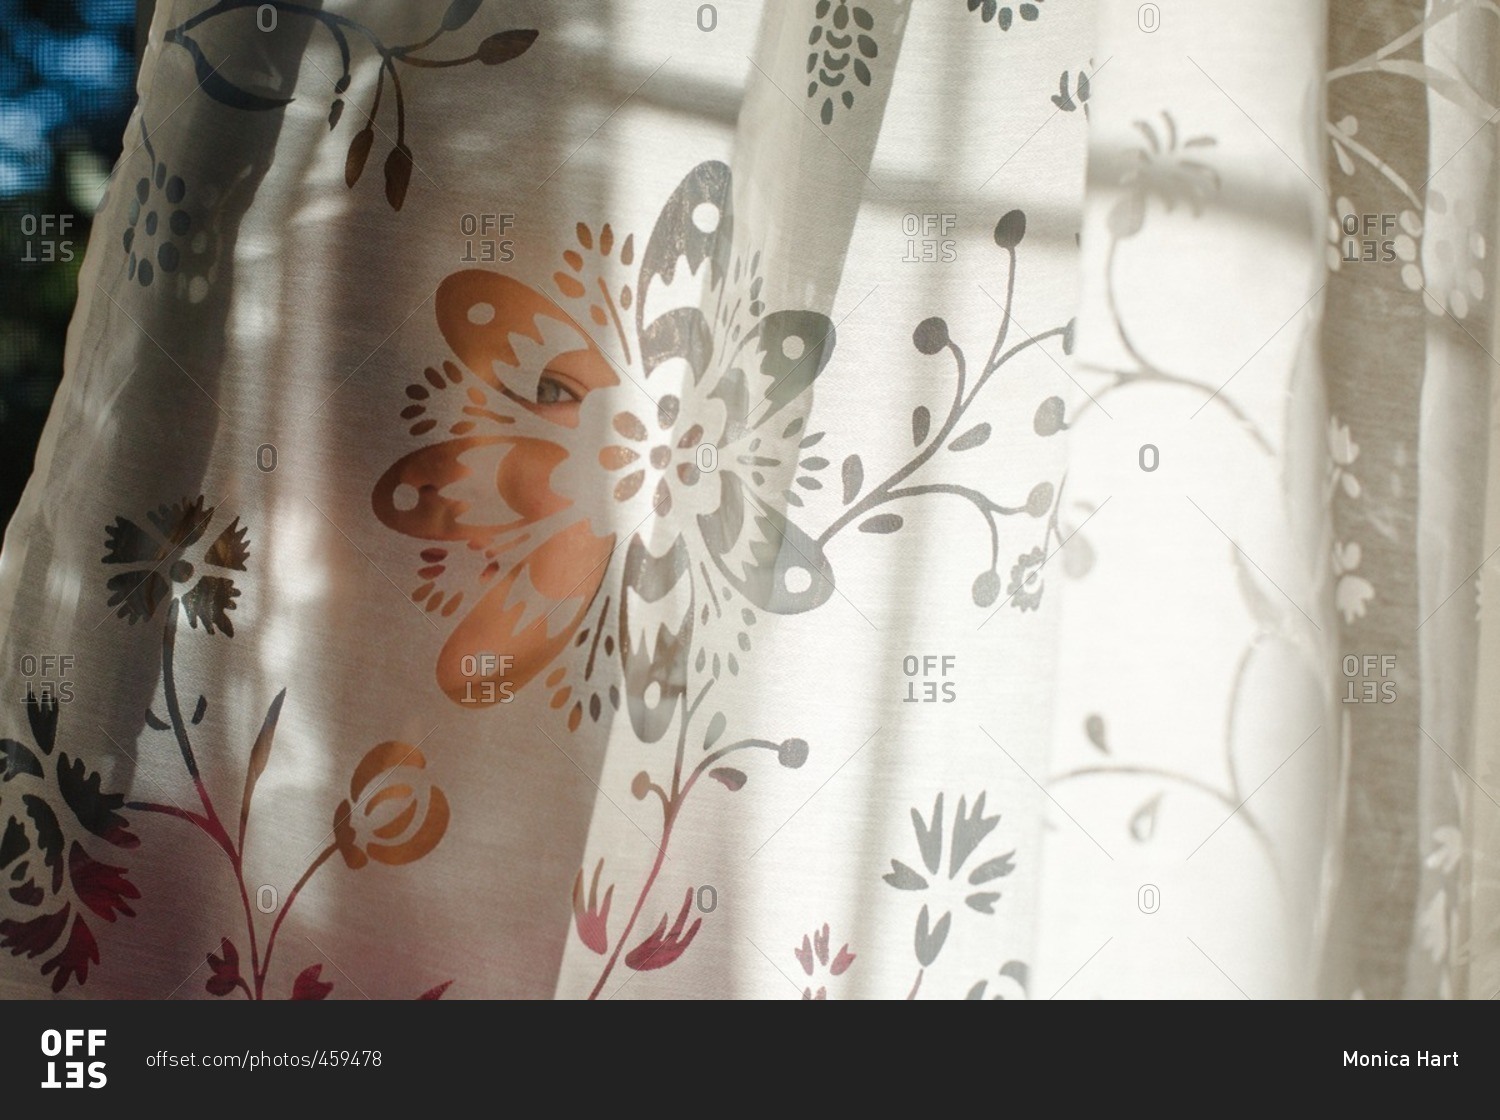 Little girl standing behind lace curtains stock photo - OFFSET